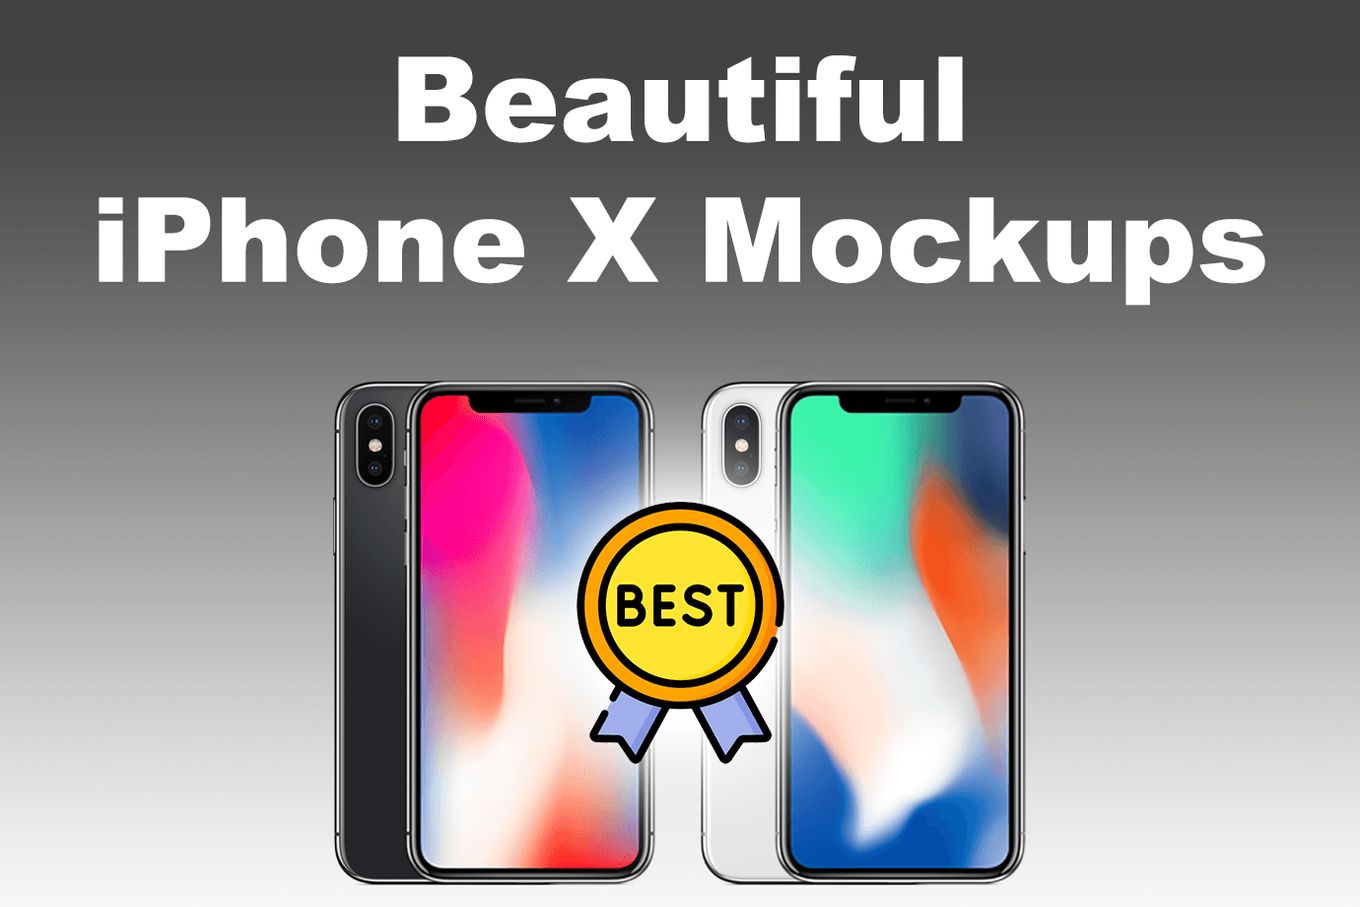 iPhone X, the iPhone’s 11th generation